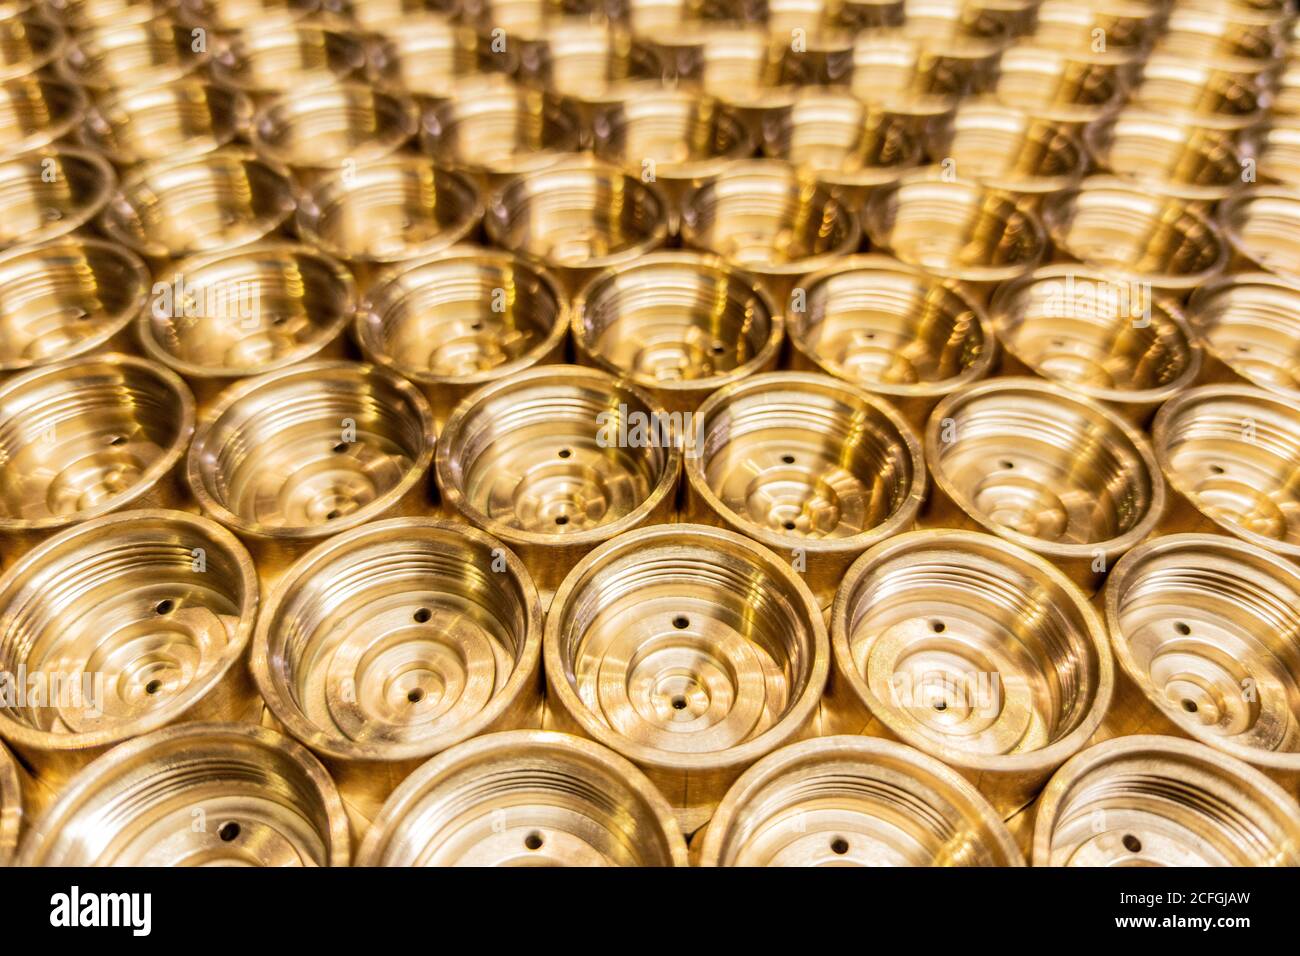 an abstract perspective industrial close-up background of shiny brass metal threaded hexagonal fitting parts Stock Photo